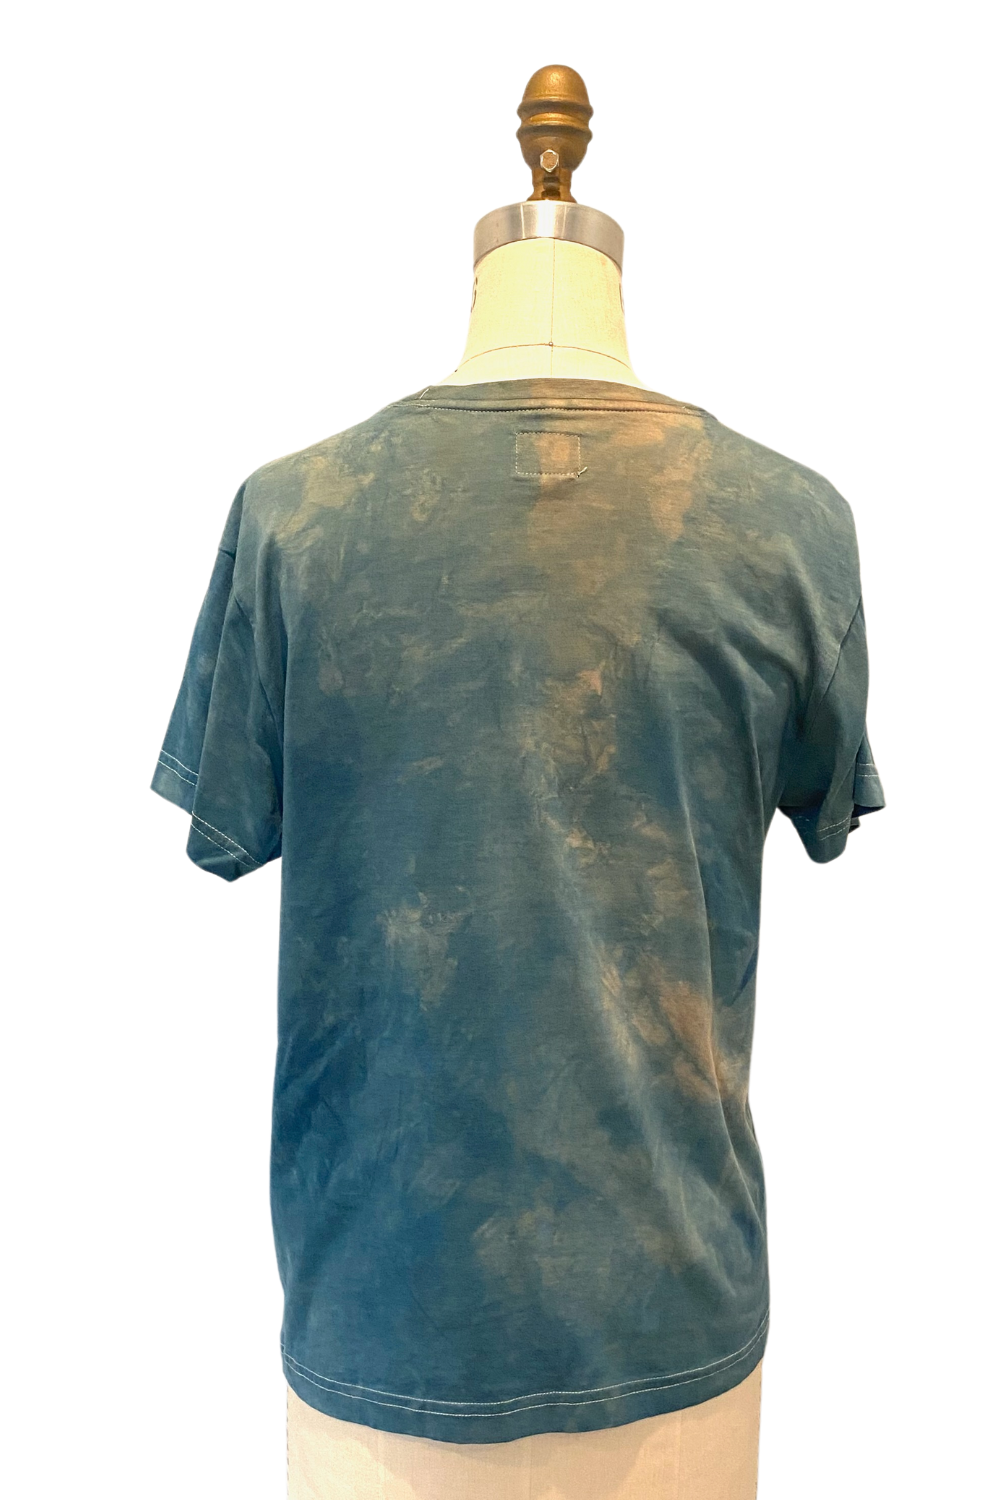 Botanically Dyed Crew Neck T shirt in Blue Brown, Size Small